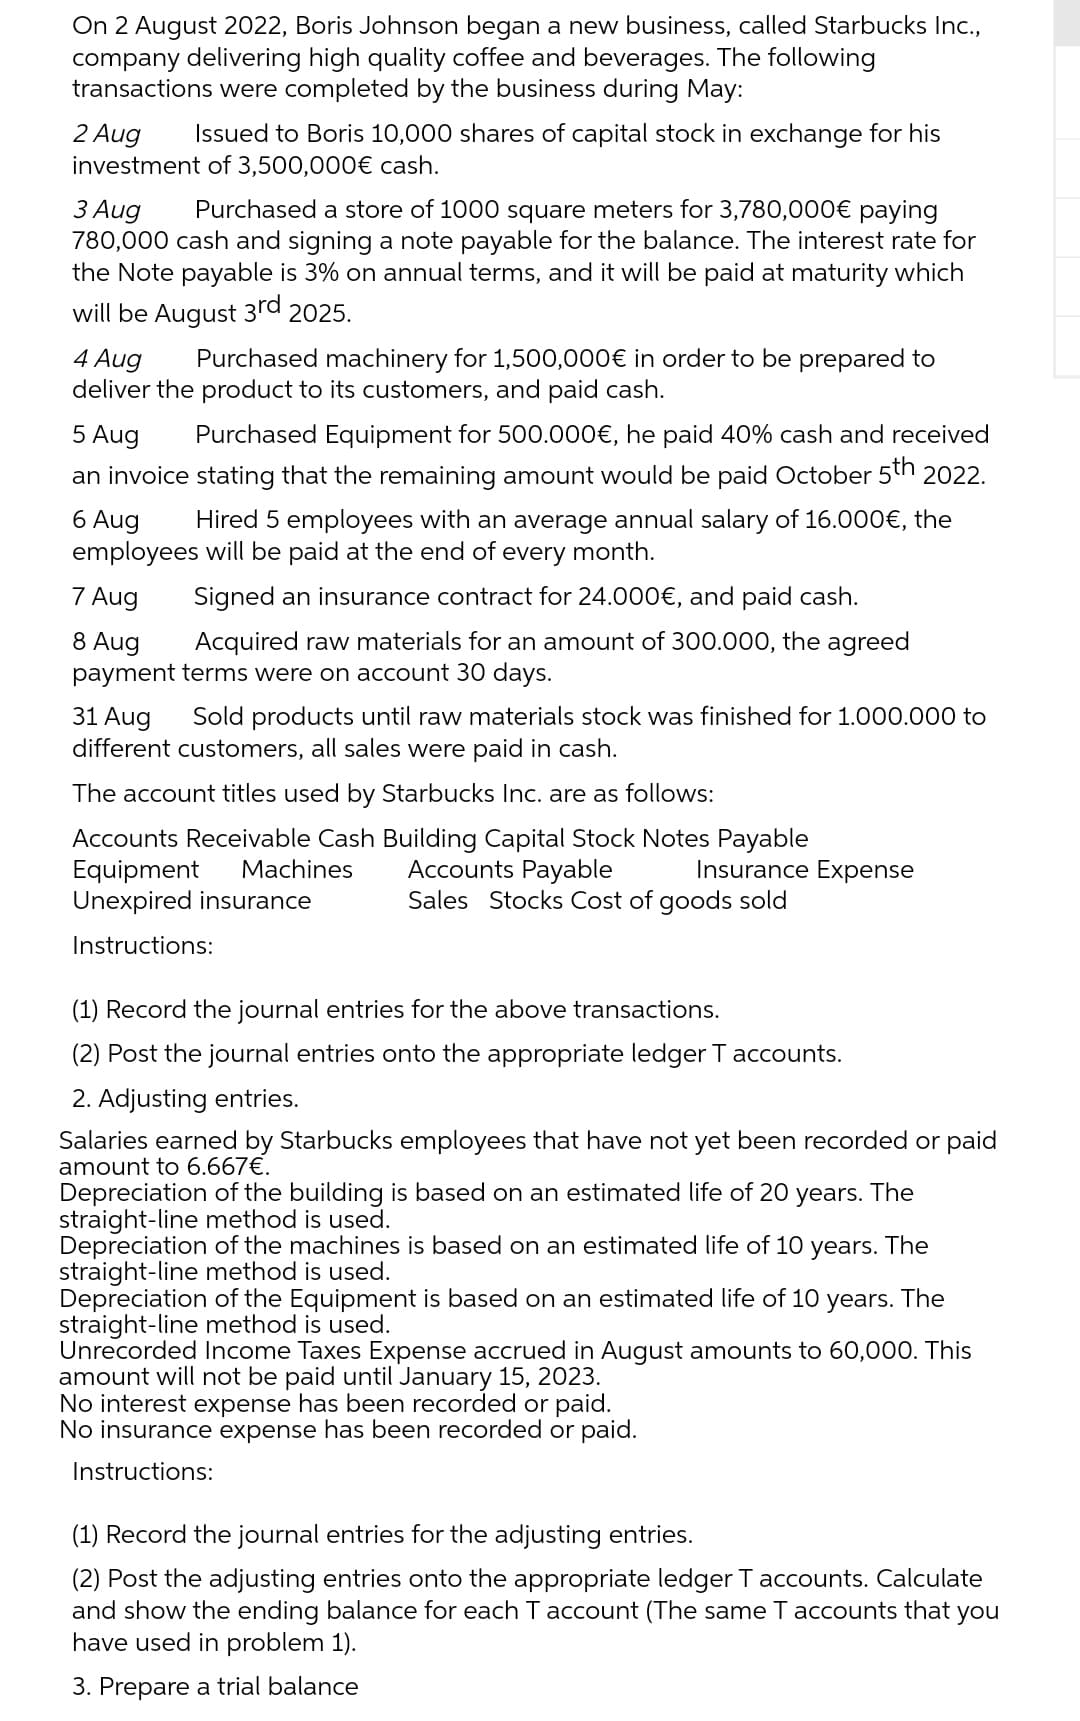 On 2 August 2022, Boris Johnson began a new business, called Starbucks Inc.,
company delivering high quality coffee and beverages. The following
transactions were completed by the business during May:
2 Aug Issued to Boris 10,000 shares of capital stock in exchange for his
investment of 3,500,000€ cash.
3 Aug
Purchased a store of 1000 square meters for 3,780,000€ paying
780,000 cash and signing a note payable for the balance. The interest rate for
the Note payable is 3% on annual terms, and it will be paid at maturity which
will be August 3rd 2025.
4 Aug
Purchased machinery for 1,500,000€ in order to be prepared to
deliver the product to its customers, and paid cash.
5 Aug
Purchased Equipment for 500.000€, he paid 40% cash and received
an invoice stating that the remaining amount would be paid October 5th 2022.
6 Aug
Hired 5 employees with an average annual salary of 16.000€, the
employees will be paid at the end of every month.
7 Aug
Signed an insurance contract for 24.000€, and paid cash.
8 Aug
Acquired raw materials for an amount of 300.000, the agreed
payment terms were on account 30 days.
31 Aug
Sold products until raw materials stock was finished for 1.000.000 to
different customers, all sales were paid in cash.
The account titles used by Starbucks Inc. are as follows:
Accounts Receivable Cash Building Capital Stock Notes Payable
Machines
Equipment
Unexpired insurance
Instructions:
Accounts Payable
Sales Stocks Cost of goods sold
Insurance Expense
(1) Record the journal entries for the above transactions.
(2) Post the journal entries onto the appropriate ledger T accounts.
2. Adjusting entries.
Salaries earned by Starbucks employees that have not yet been recorded or paid
amount to 6.667€.
Depreciation of the building is based on an estimated life of 20 years. The
straight-line method is used.
Depreciation of the machines is based on an estimated life of 10 years. The
straight-line method is used.
Depreciation of the Equipment is based on an estimated life of 10 years. The
straight-line method is used.
Unrecorded Income Taxes Expense accrued in August amounts to 60,000. This
amount will not be paid until January 15, 2023.
No interest expense has been recorded or paid.
No insurance expense has been recorded or paid.
Instructions:
(1) Record the journal entries for the adjusting entries.
(2) Post the adjusting entries onto the appropriate ledger T accounts. Calculate
and show the ending balance for each T account (The same T accounts that you
have used in problem 1).
3. Prepare a trial balance